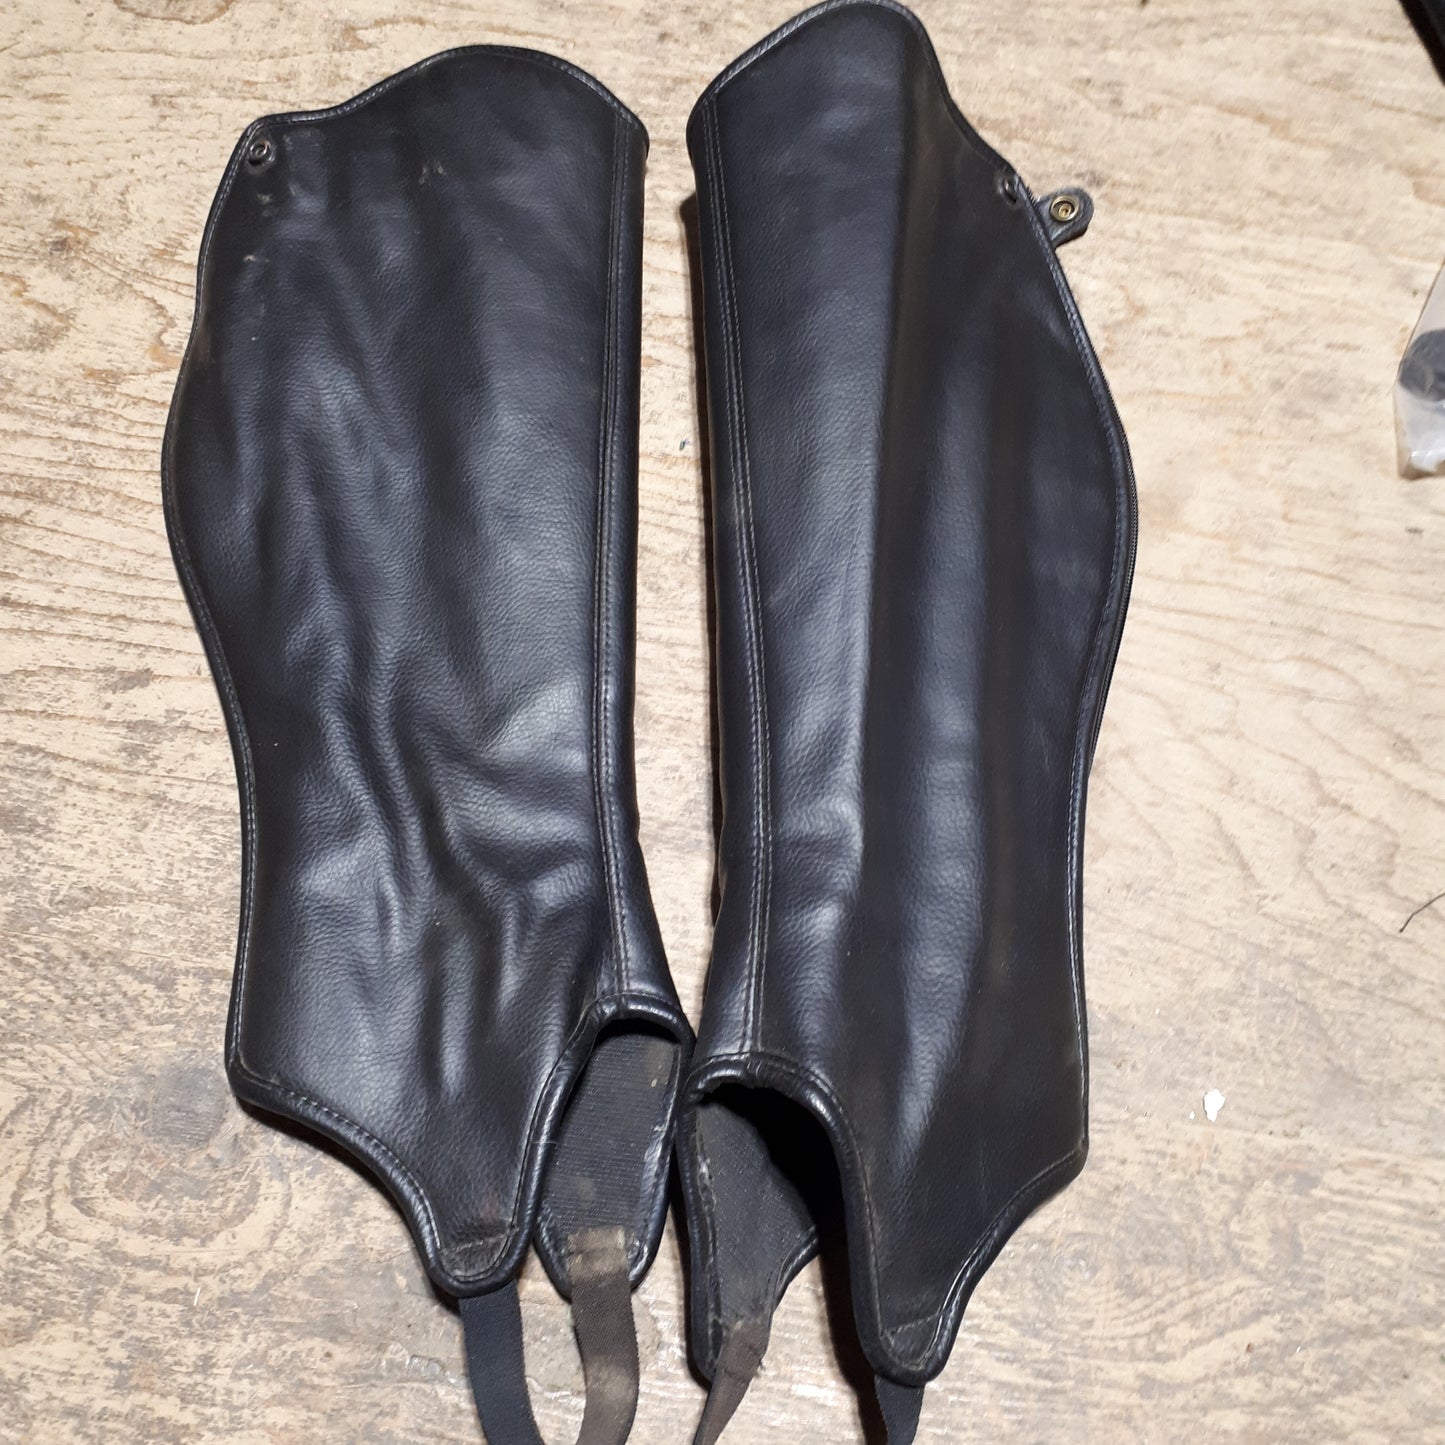 Tred step large half chaps